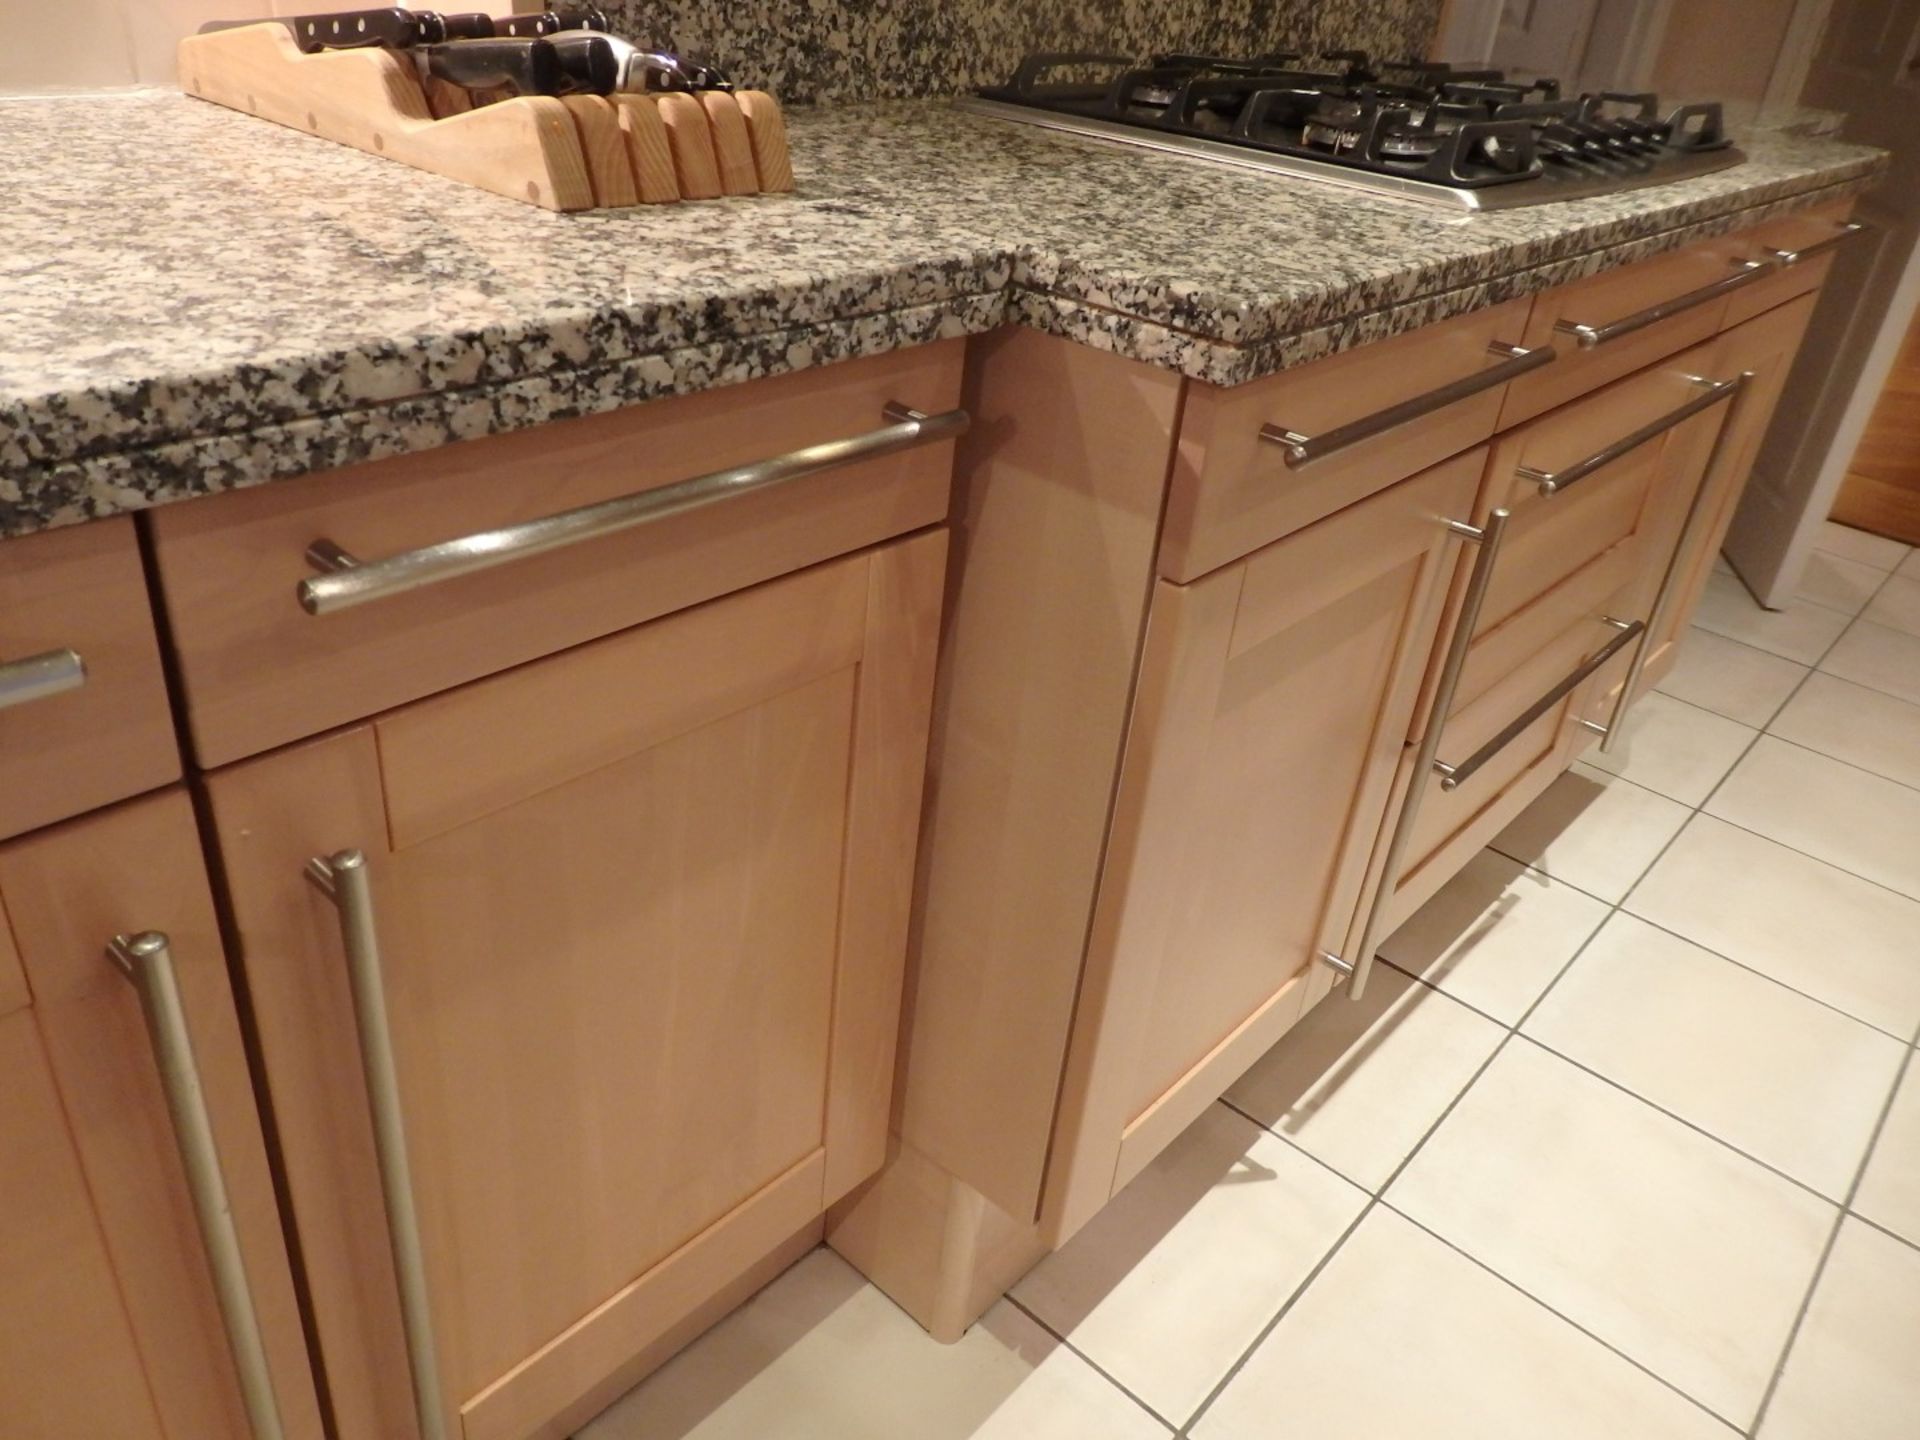 1 x Siematic Fitted Kitchen With Beech Shaker Style Doors, Granite Worktops, Central Island and - Image 42 of 151